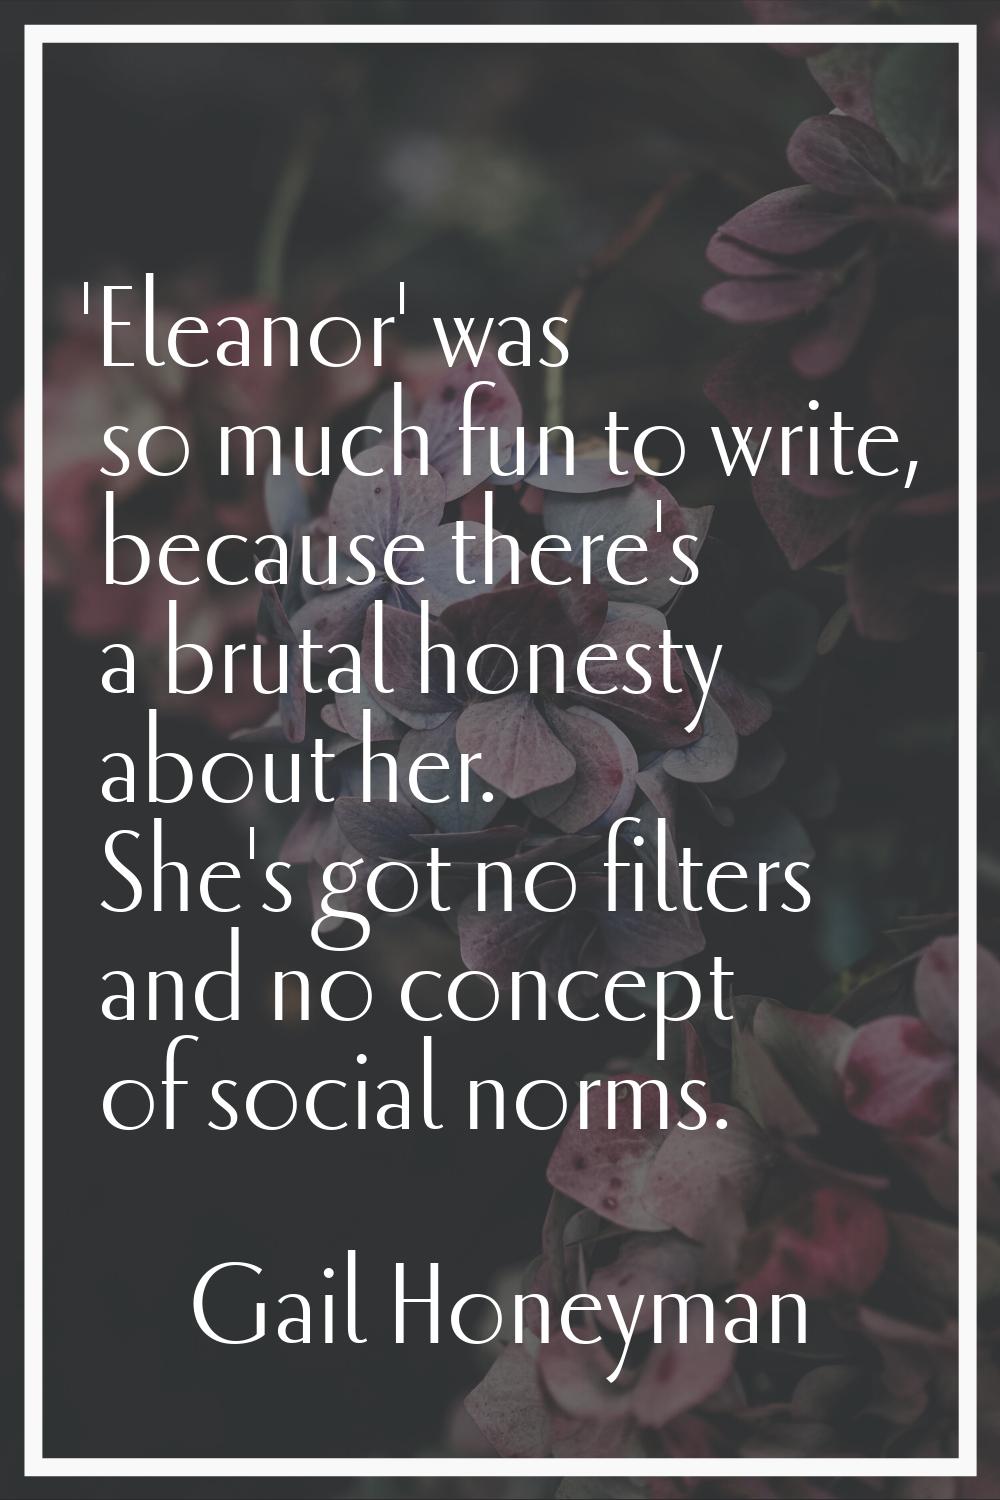 'Eleanor' was so much fun to write, because there's a brutal honesty about her. She's got no filter